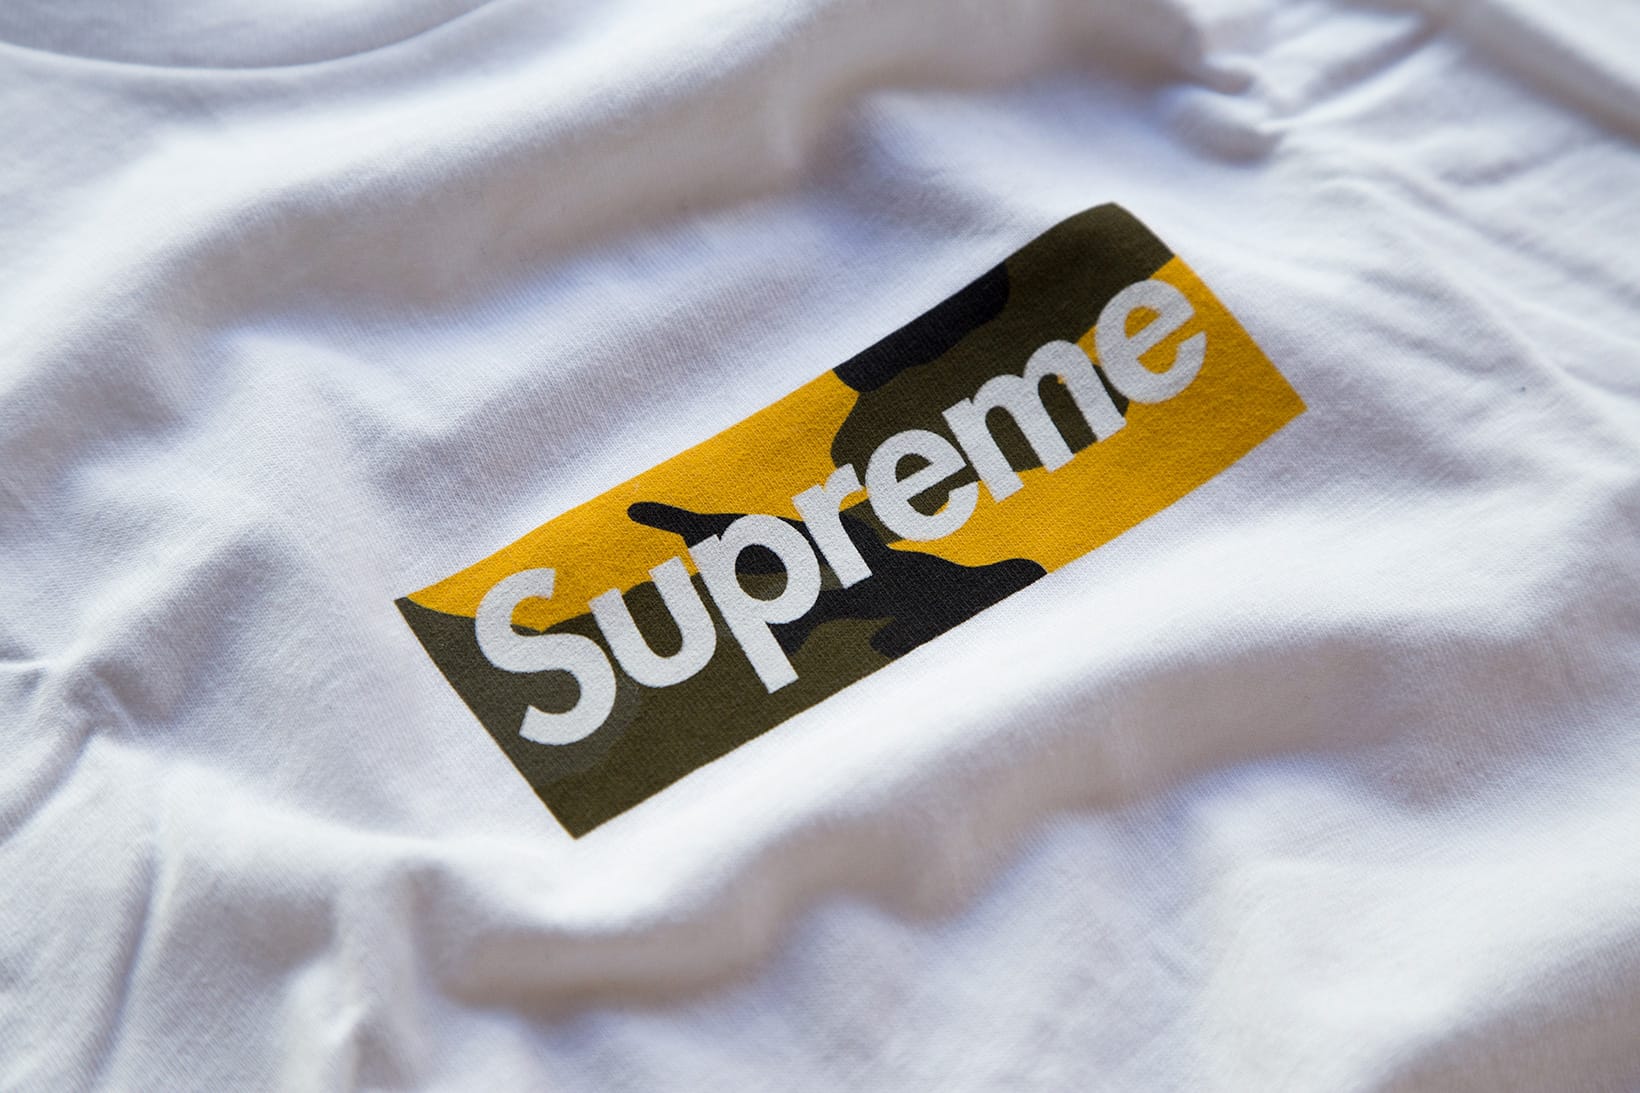 Supreme Most Expensive Shirt Online, 52% OFF | barsauvage.com